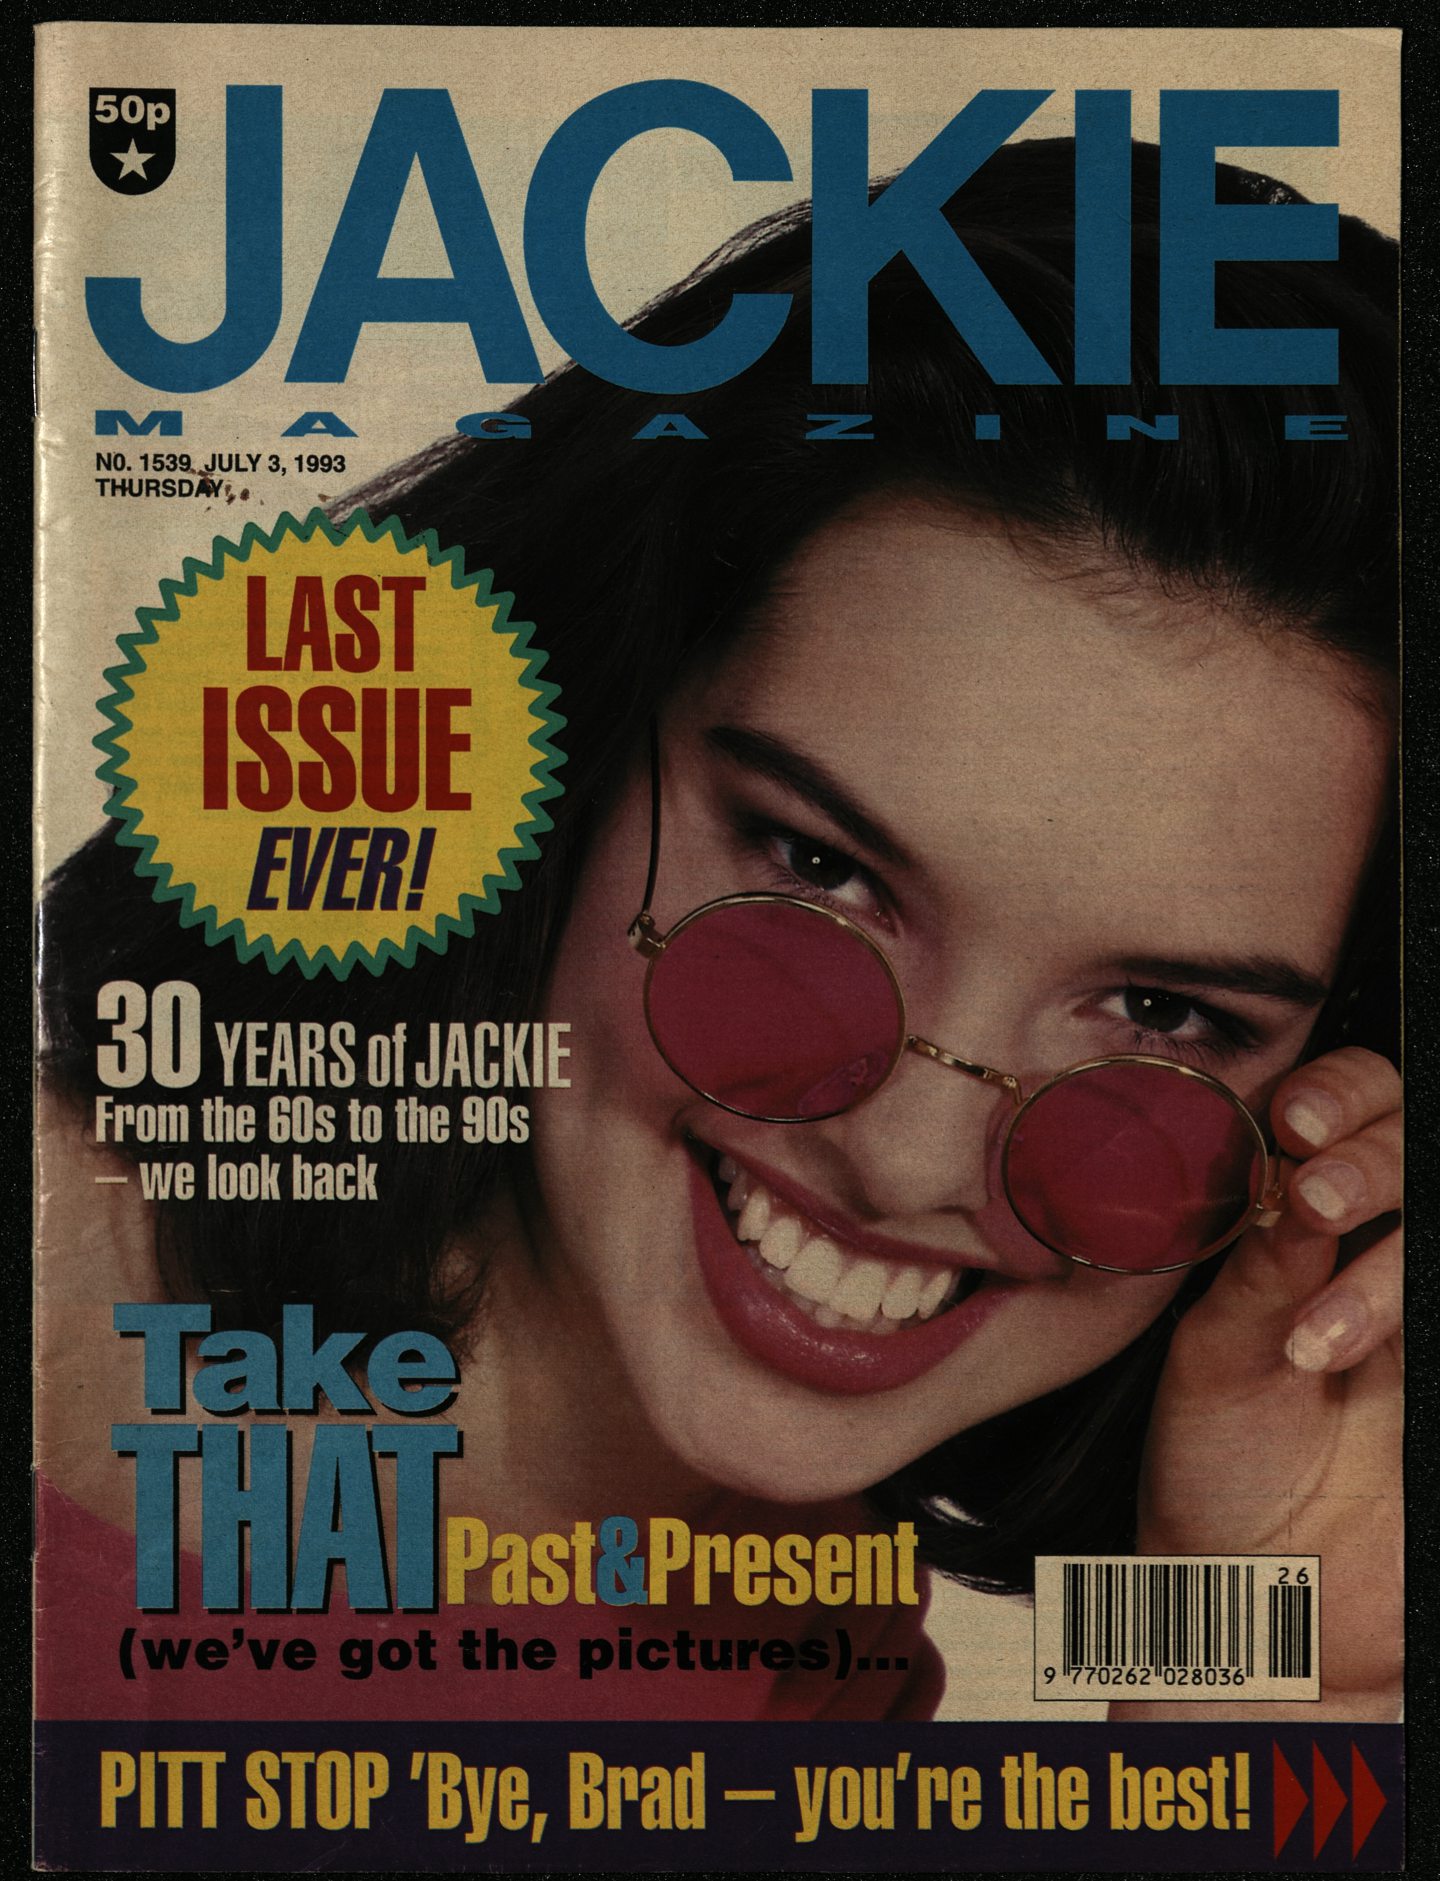 The cover of the last edition of Jackie magazine